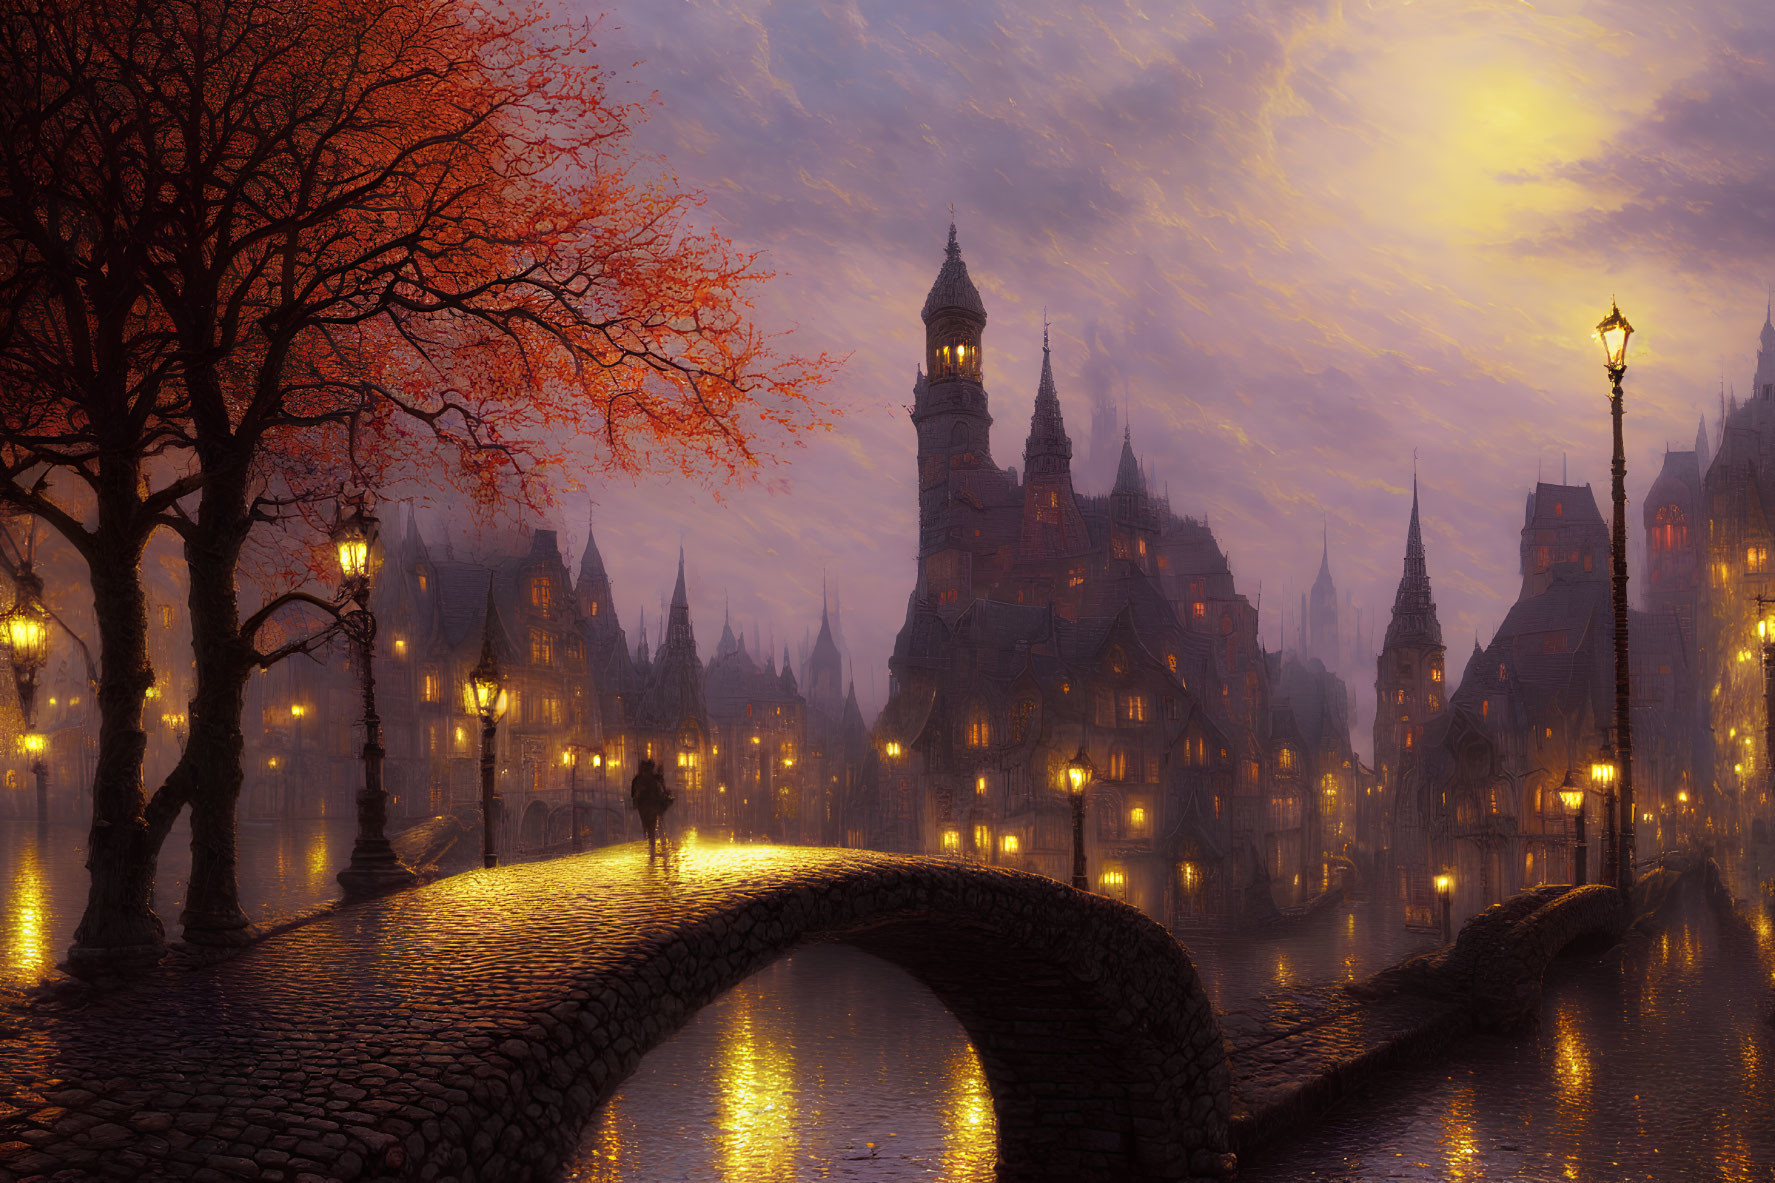 Cobblestone Bridge Over River at Dusk with Street Lamps and Old European Buildings